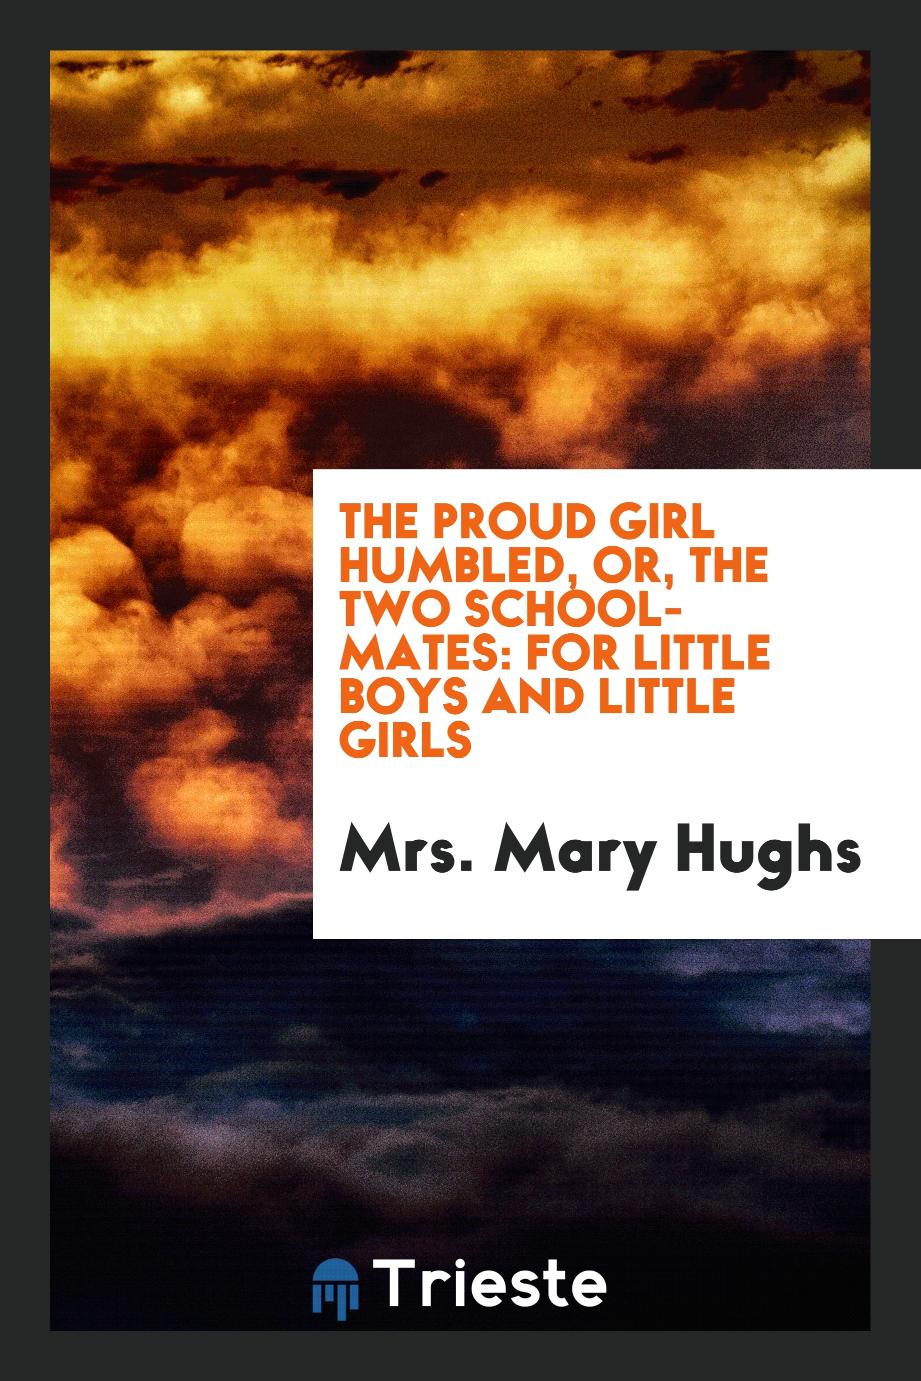 The Proud Girl Humbled, or, the Two School-Mates: For Little Boys and Little Girls